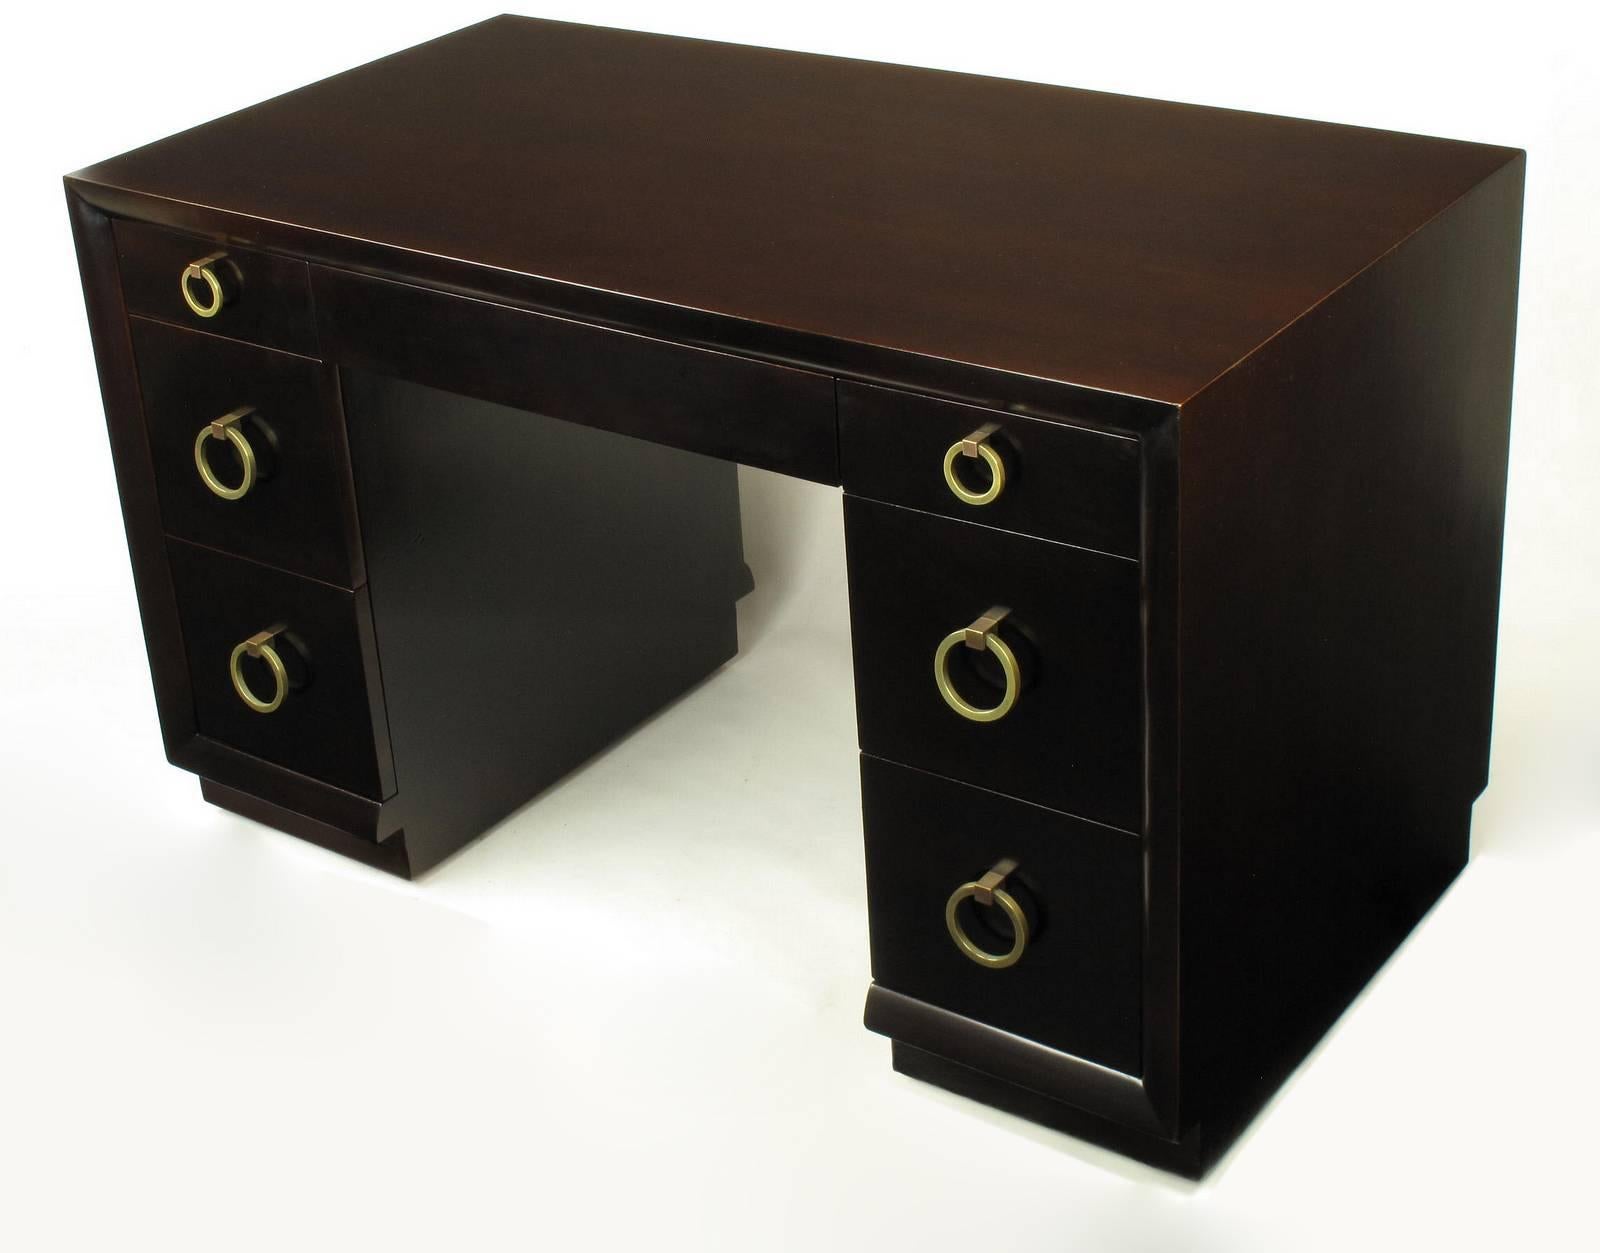 Excellently restored knee hole desk or writing table , model no. 317, by T.H. Robsjohn-Gibbings for Widdicomb. Drop ring pulls are plated in brass and the original patina has been burnished but not polished out gloss brass. The desk back is engraved